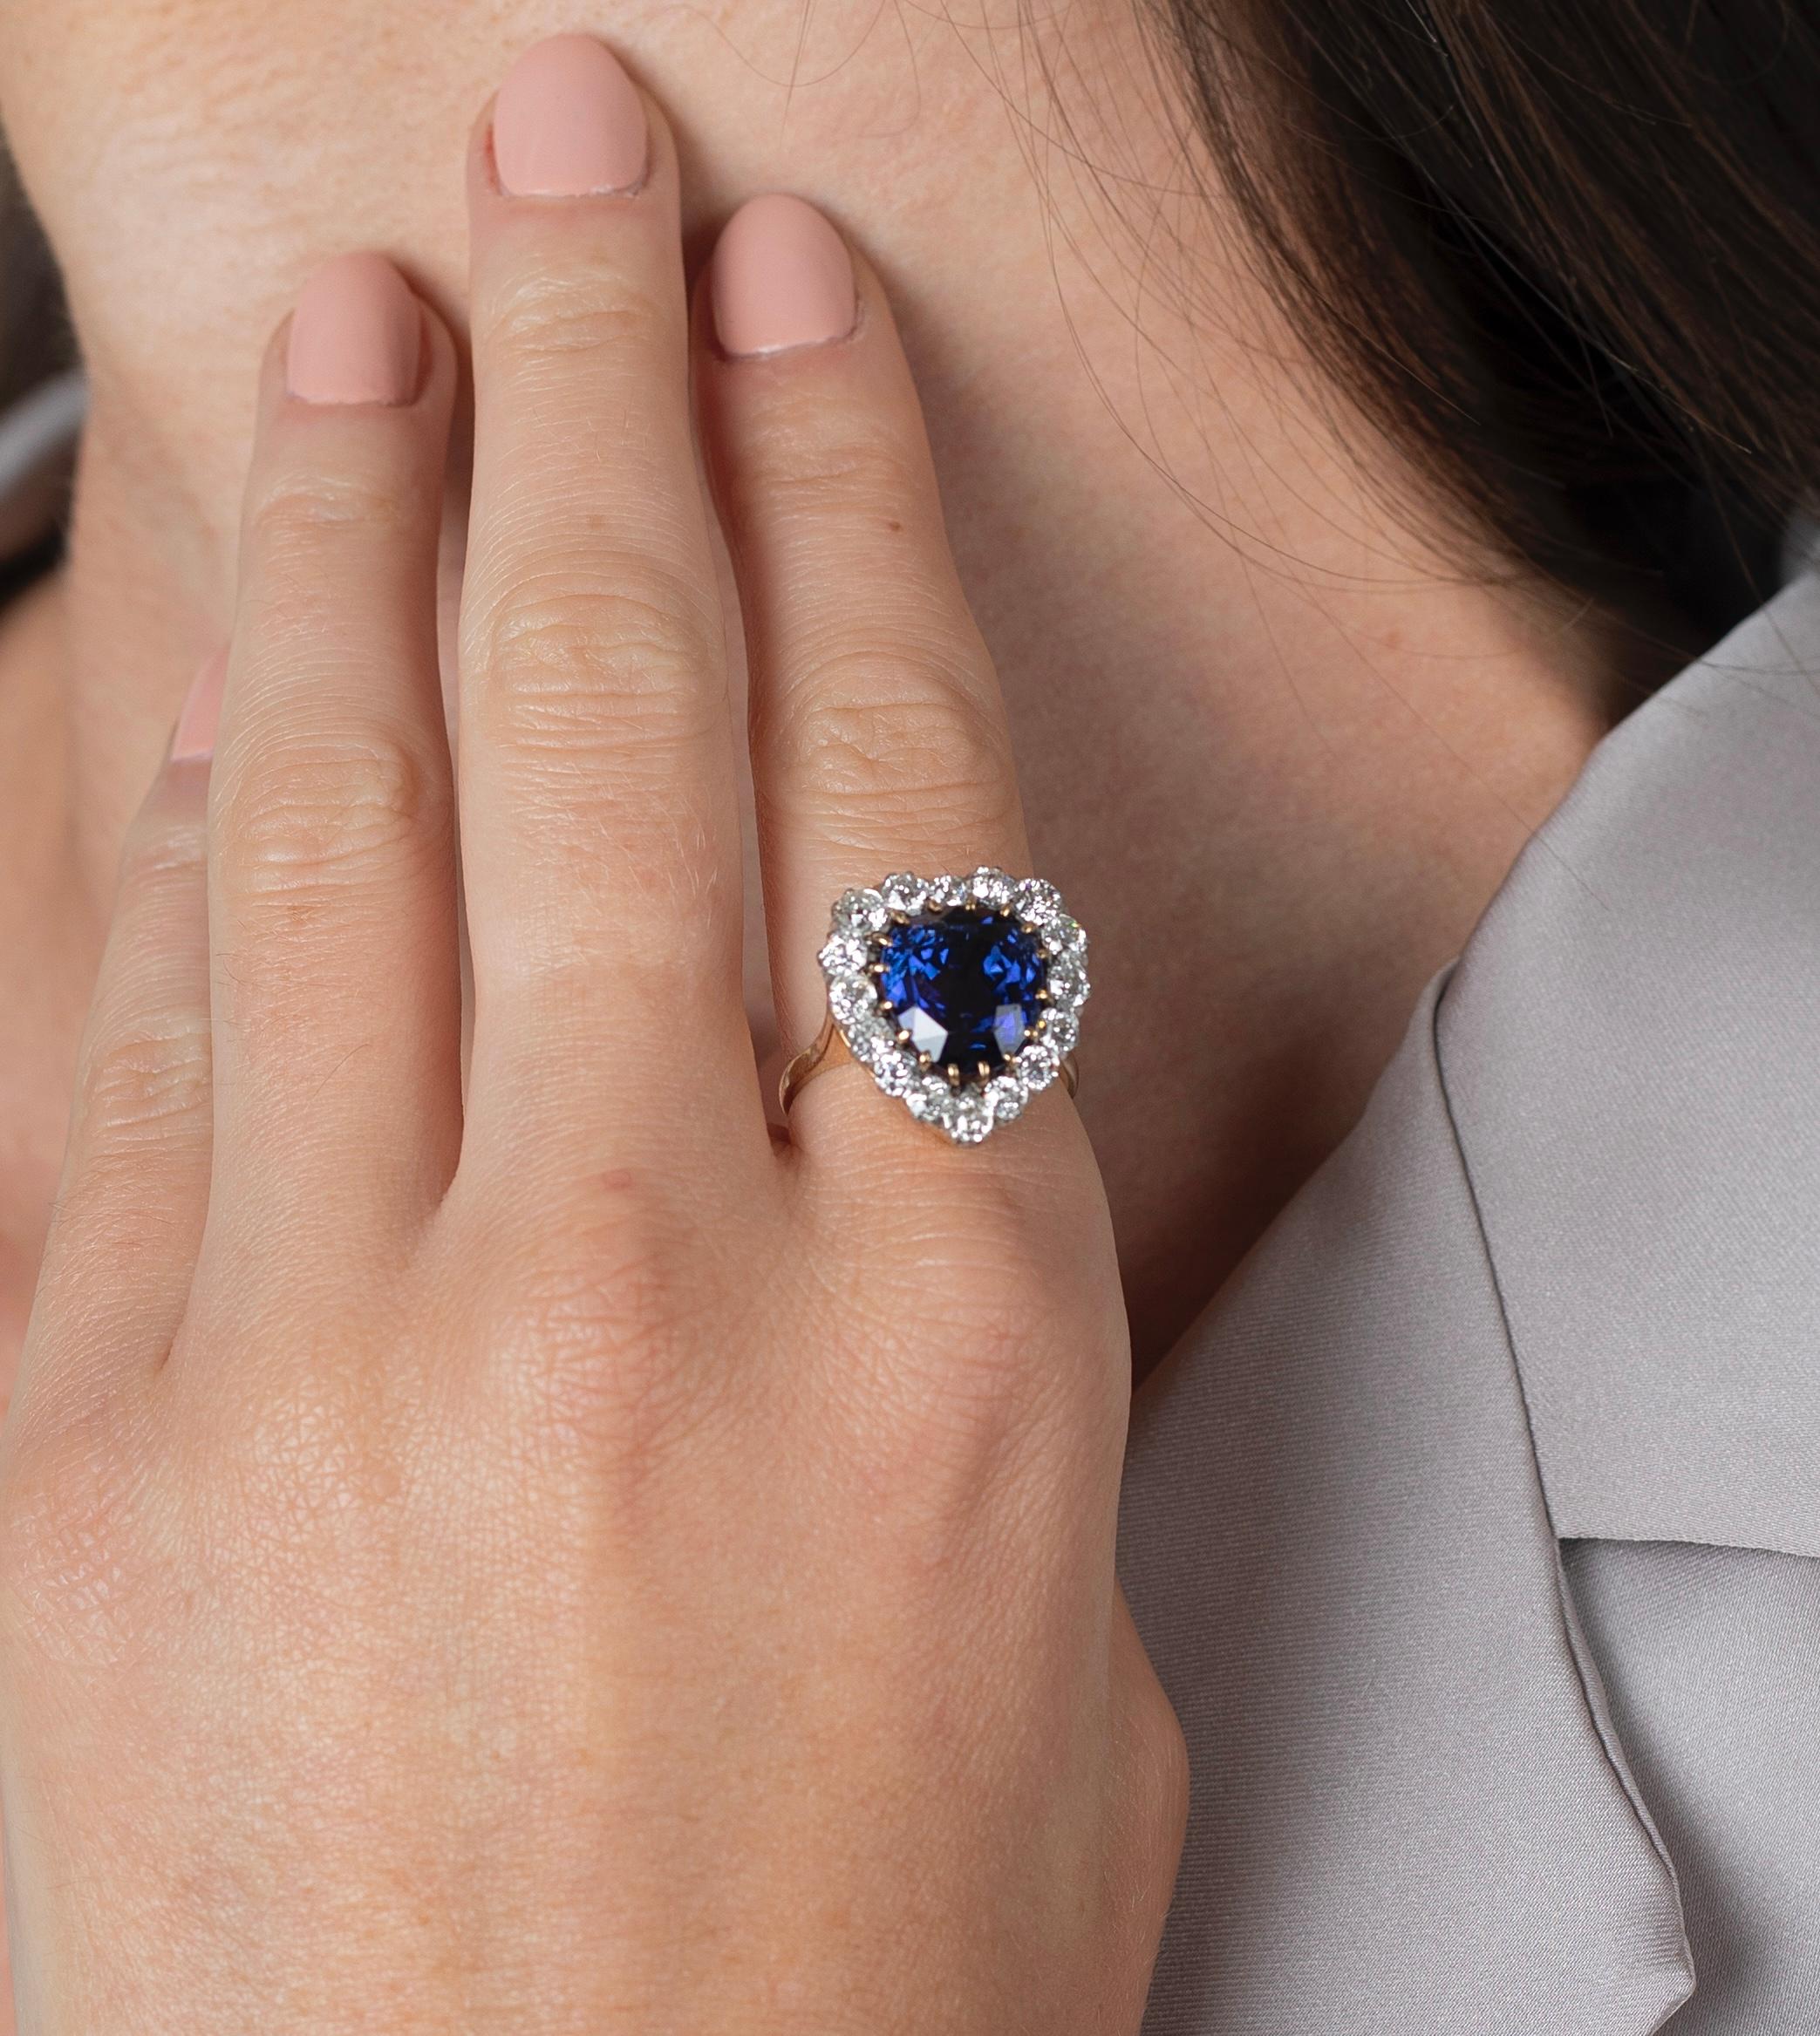 9 Carat no heat Blue Sapphire of Ceylon origin adorned with a 16 round-shaped, old European cut diamond halo. Stones set in a secure multi-prong setting with a carved basket mounting. A true vintage masterpiece.

The Blue Sapphire center stone is a